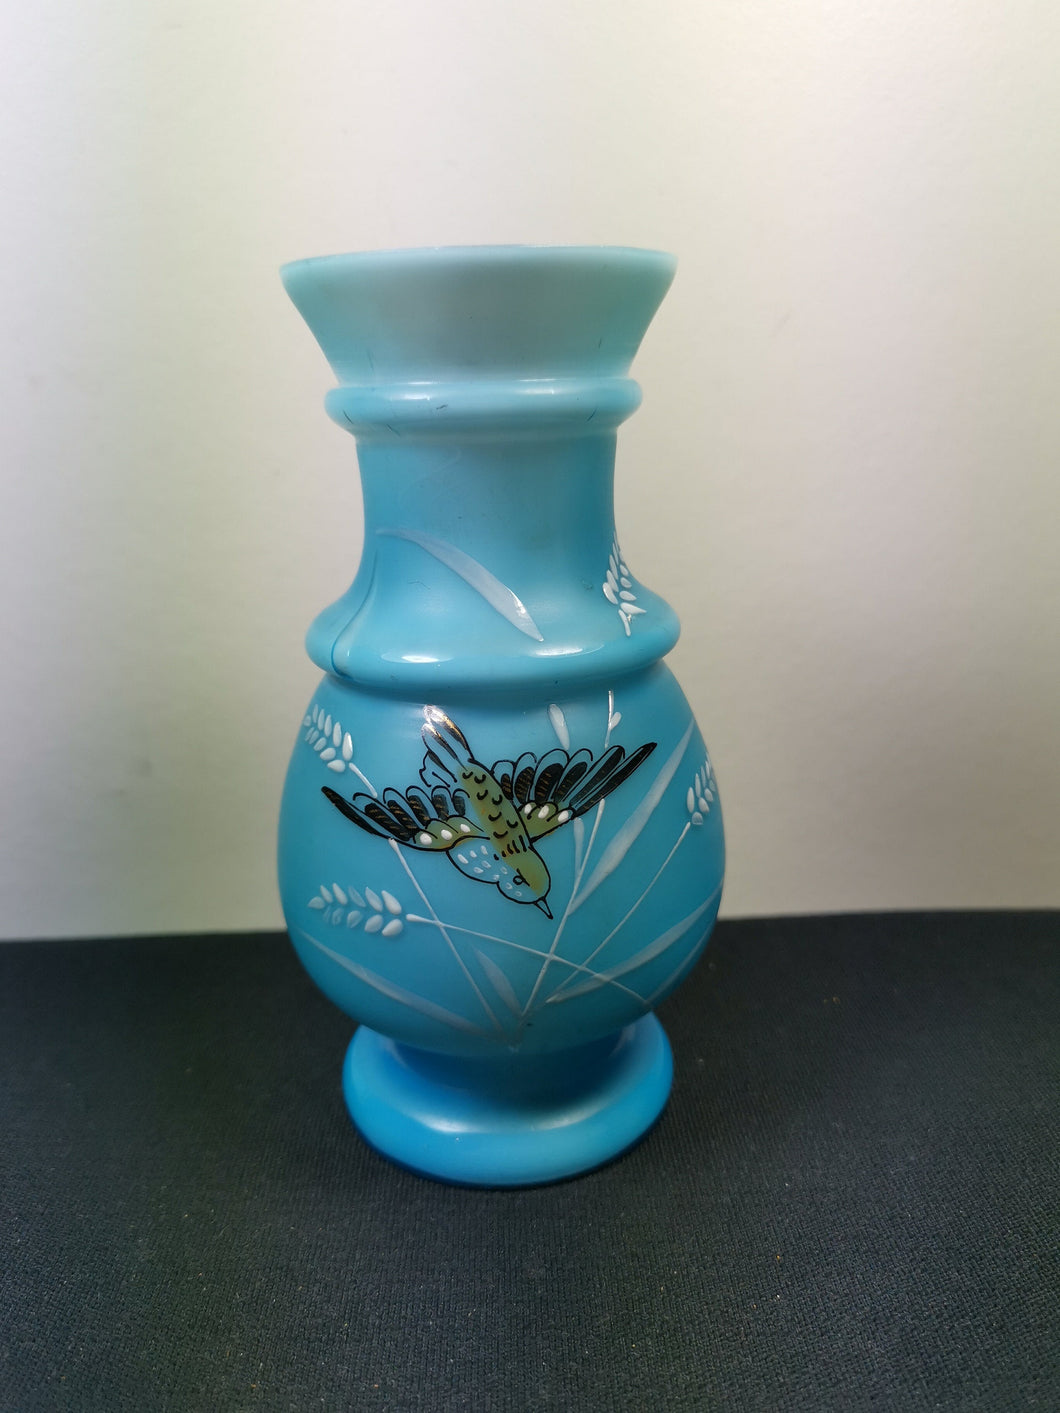 Antique Blue and White Glass Bird Flower Vase Late 1800's - Early 1900's Original Victorian Edwardian Hand Painted